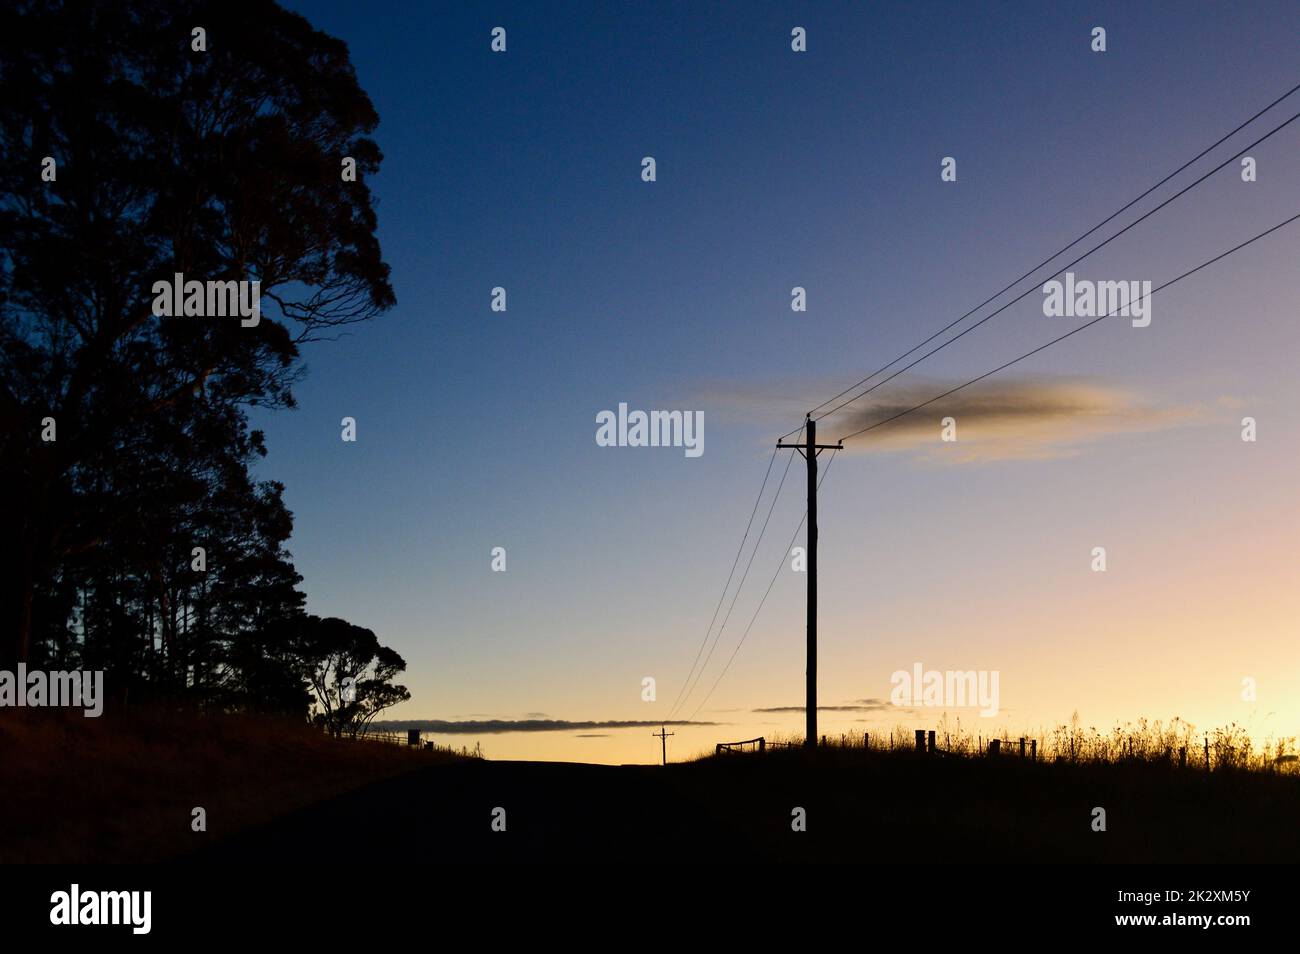 Power poles by a country road at sunset Stock Photo